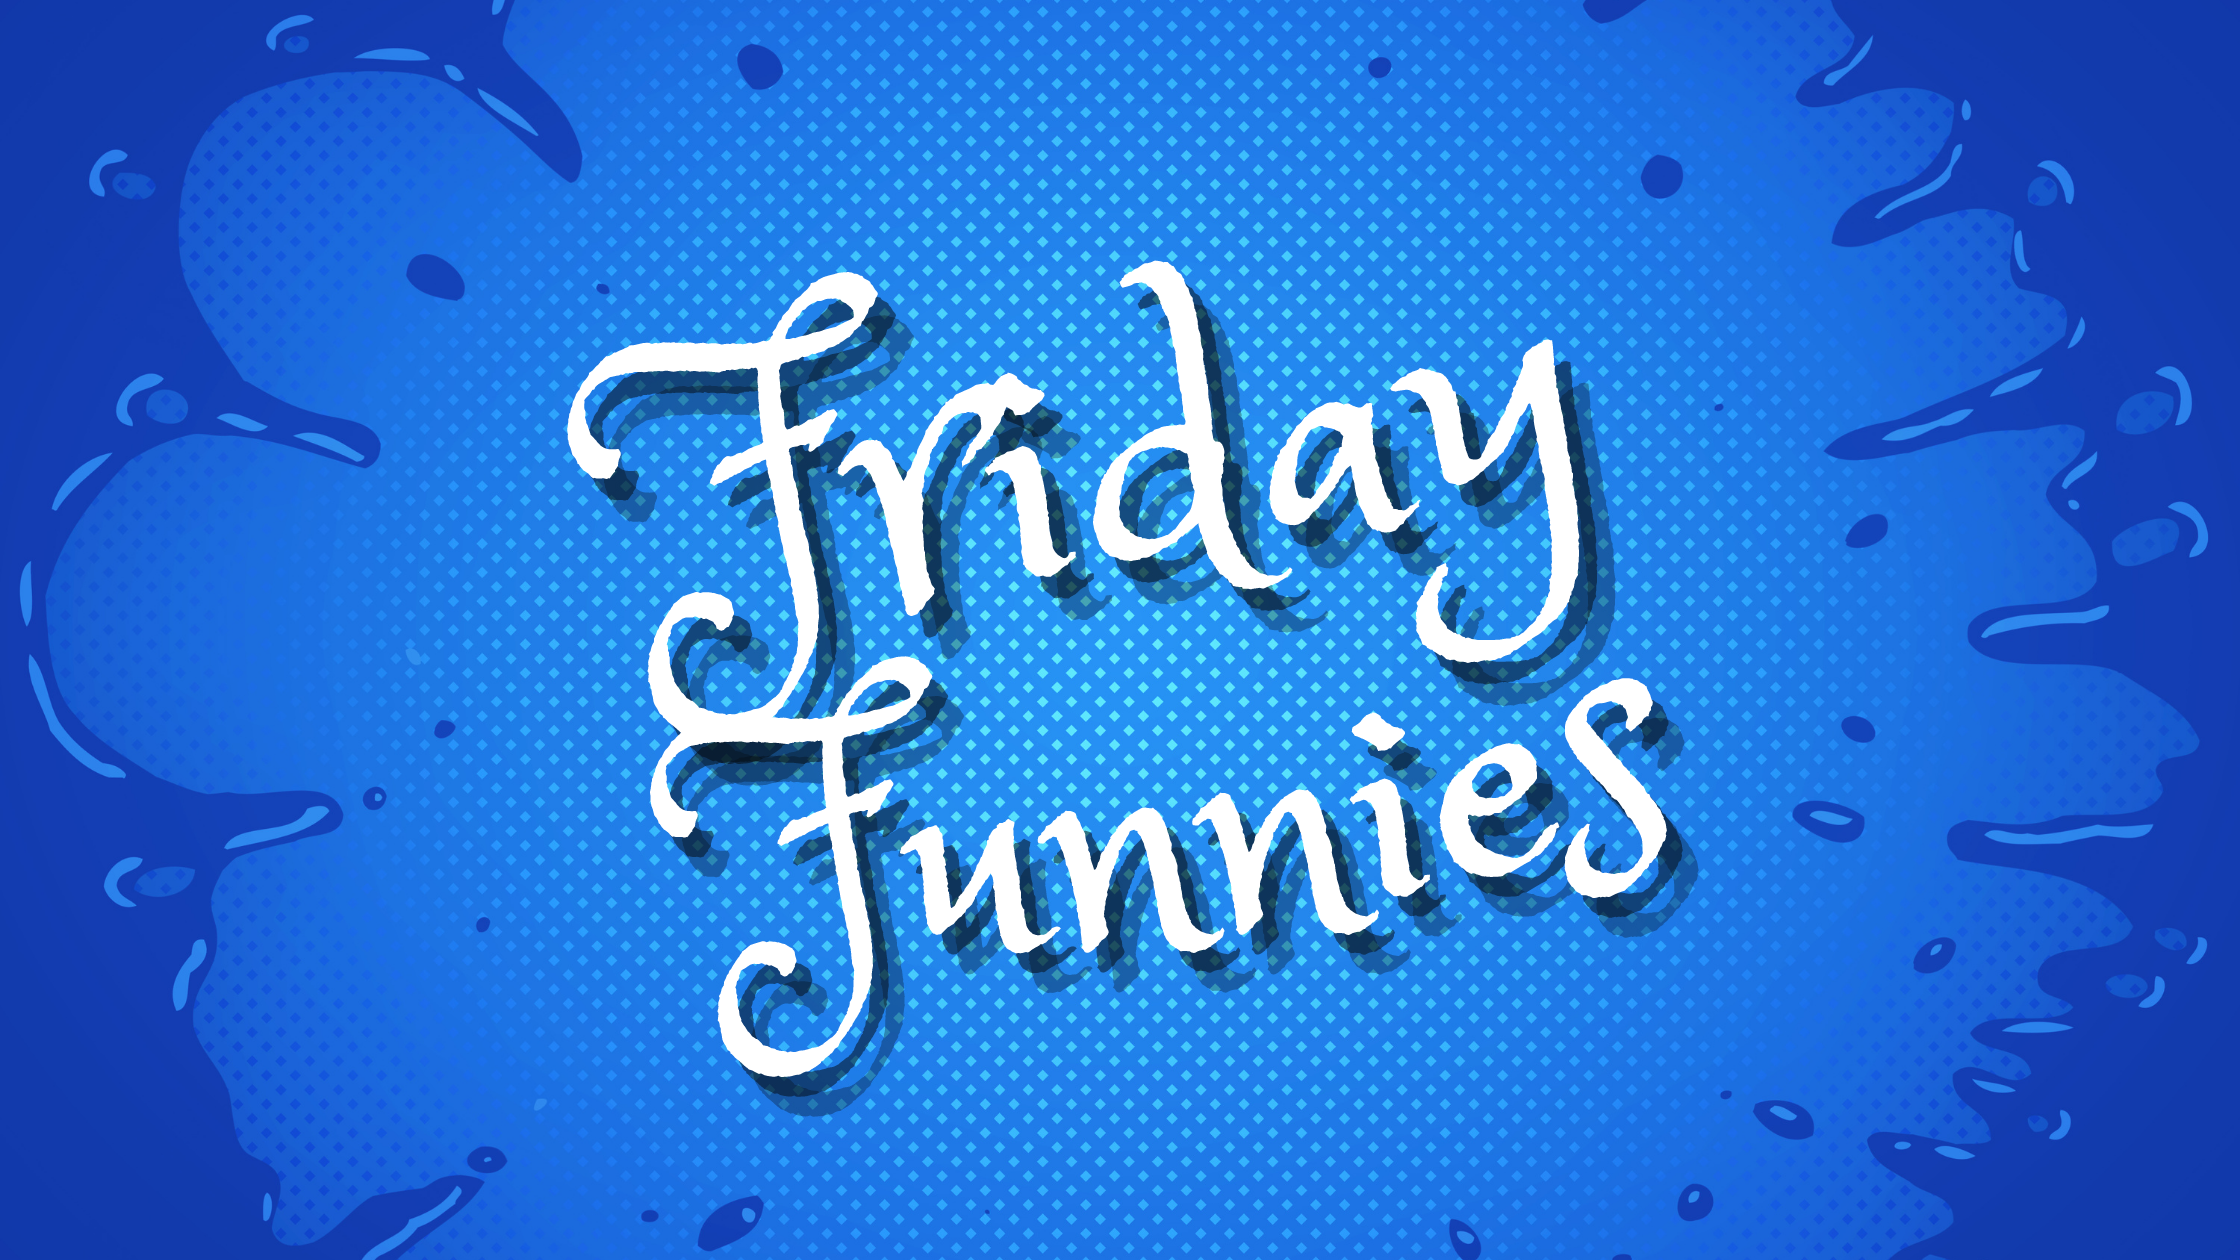 A blue splatter background with the words "Friday Funnies" written in the center